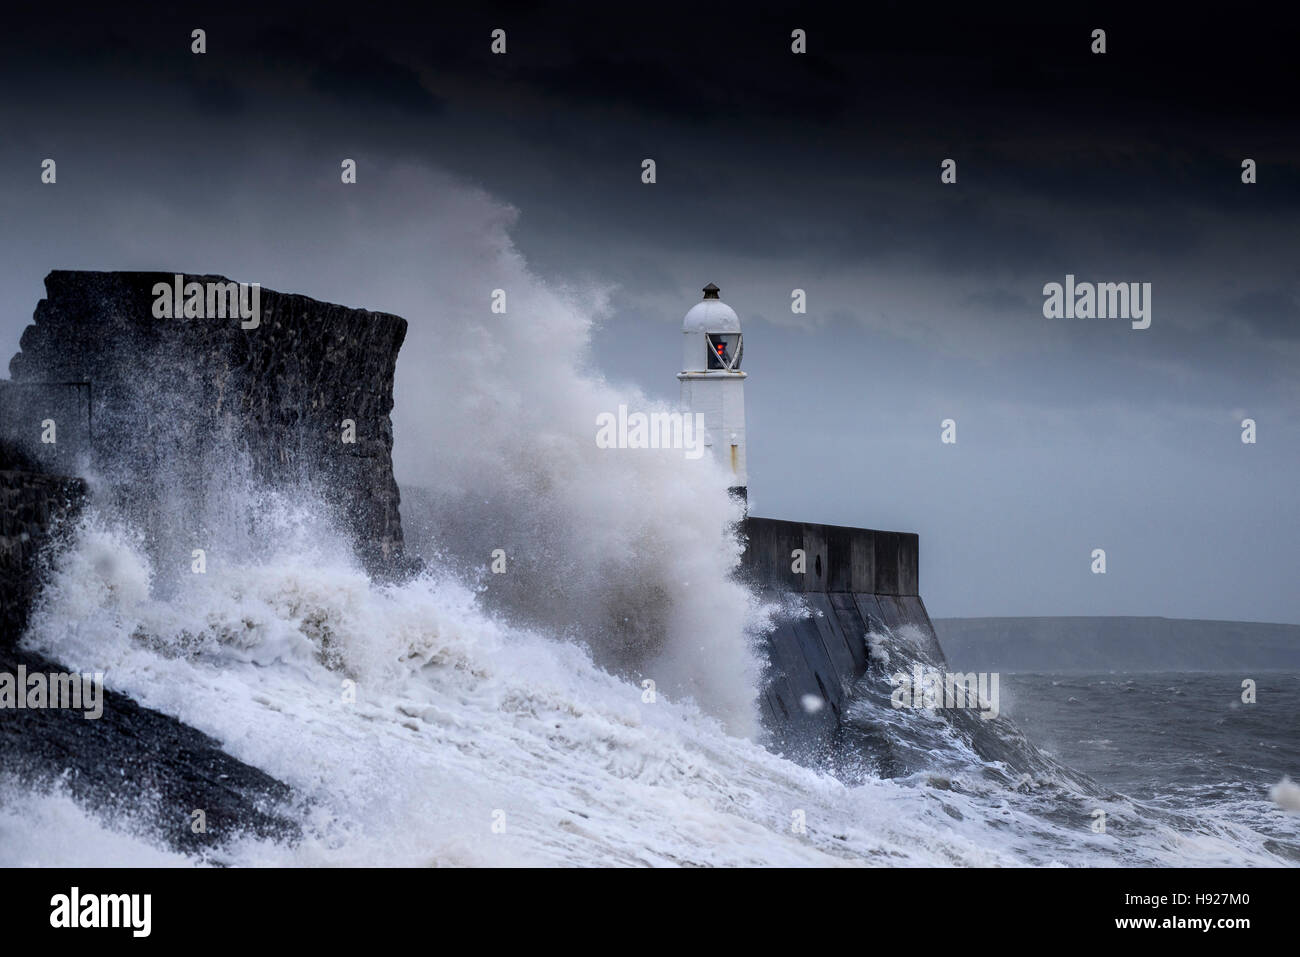 Wild seas as Storm Desmond batters the coast of Porthcawl in South Wales. Stock Photo